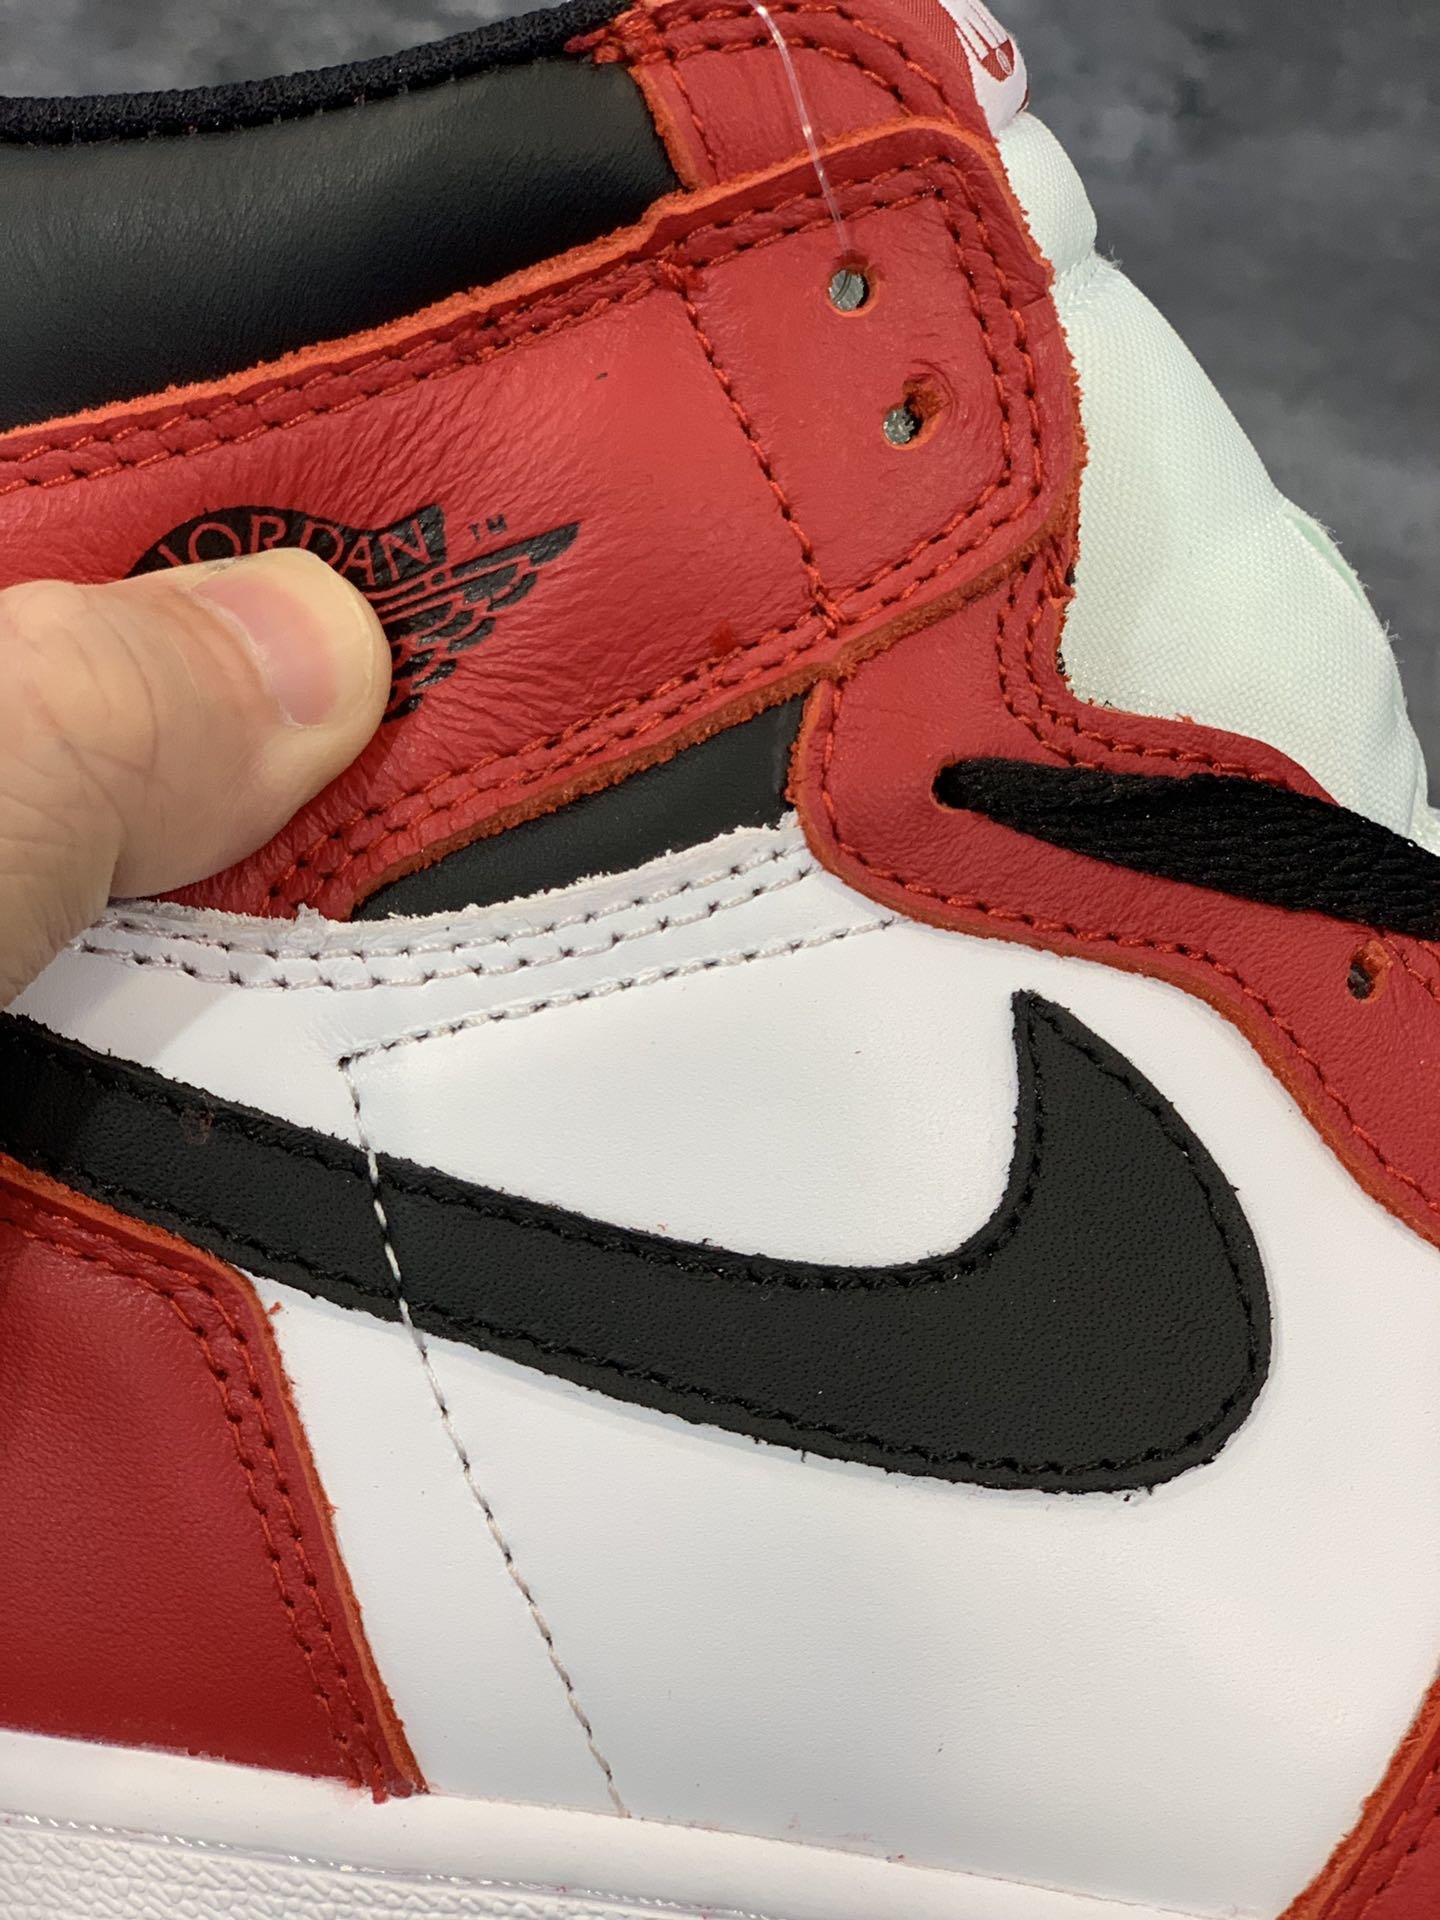 High Quality AIR JORDAN I CHICAGO  BEST VERSION with retail leather